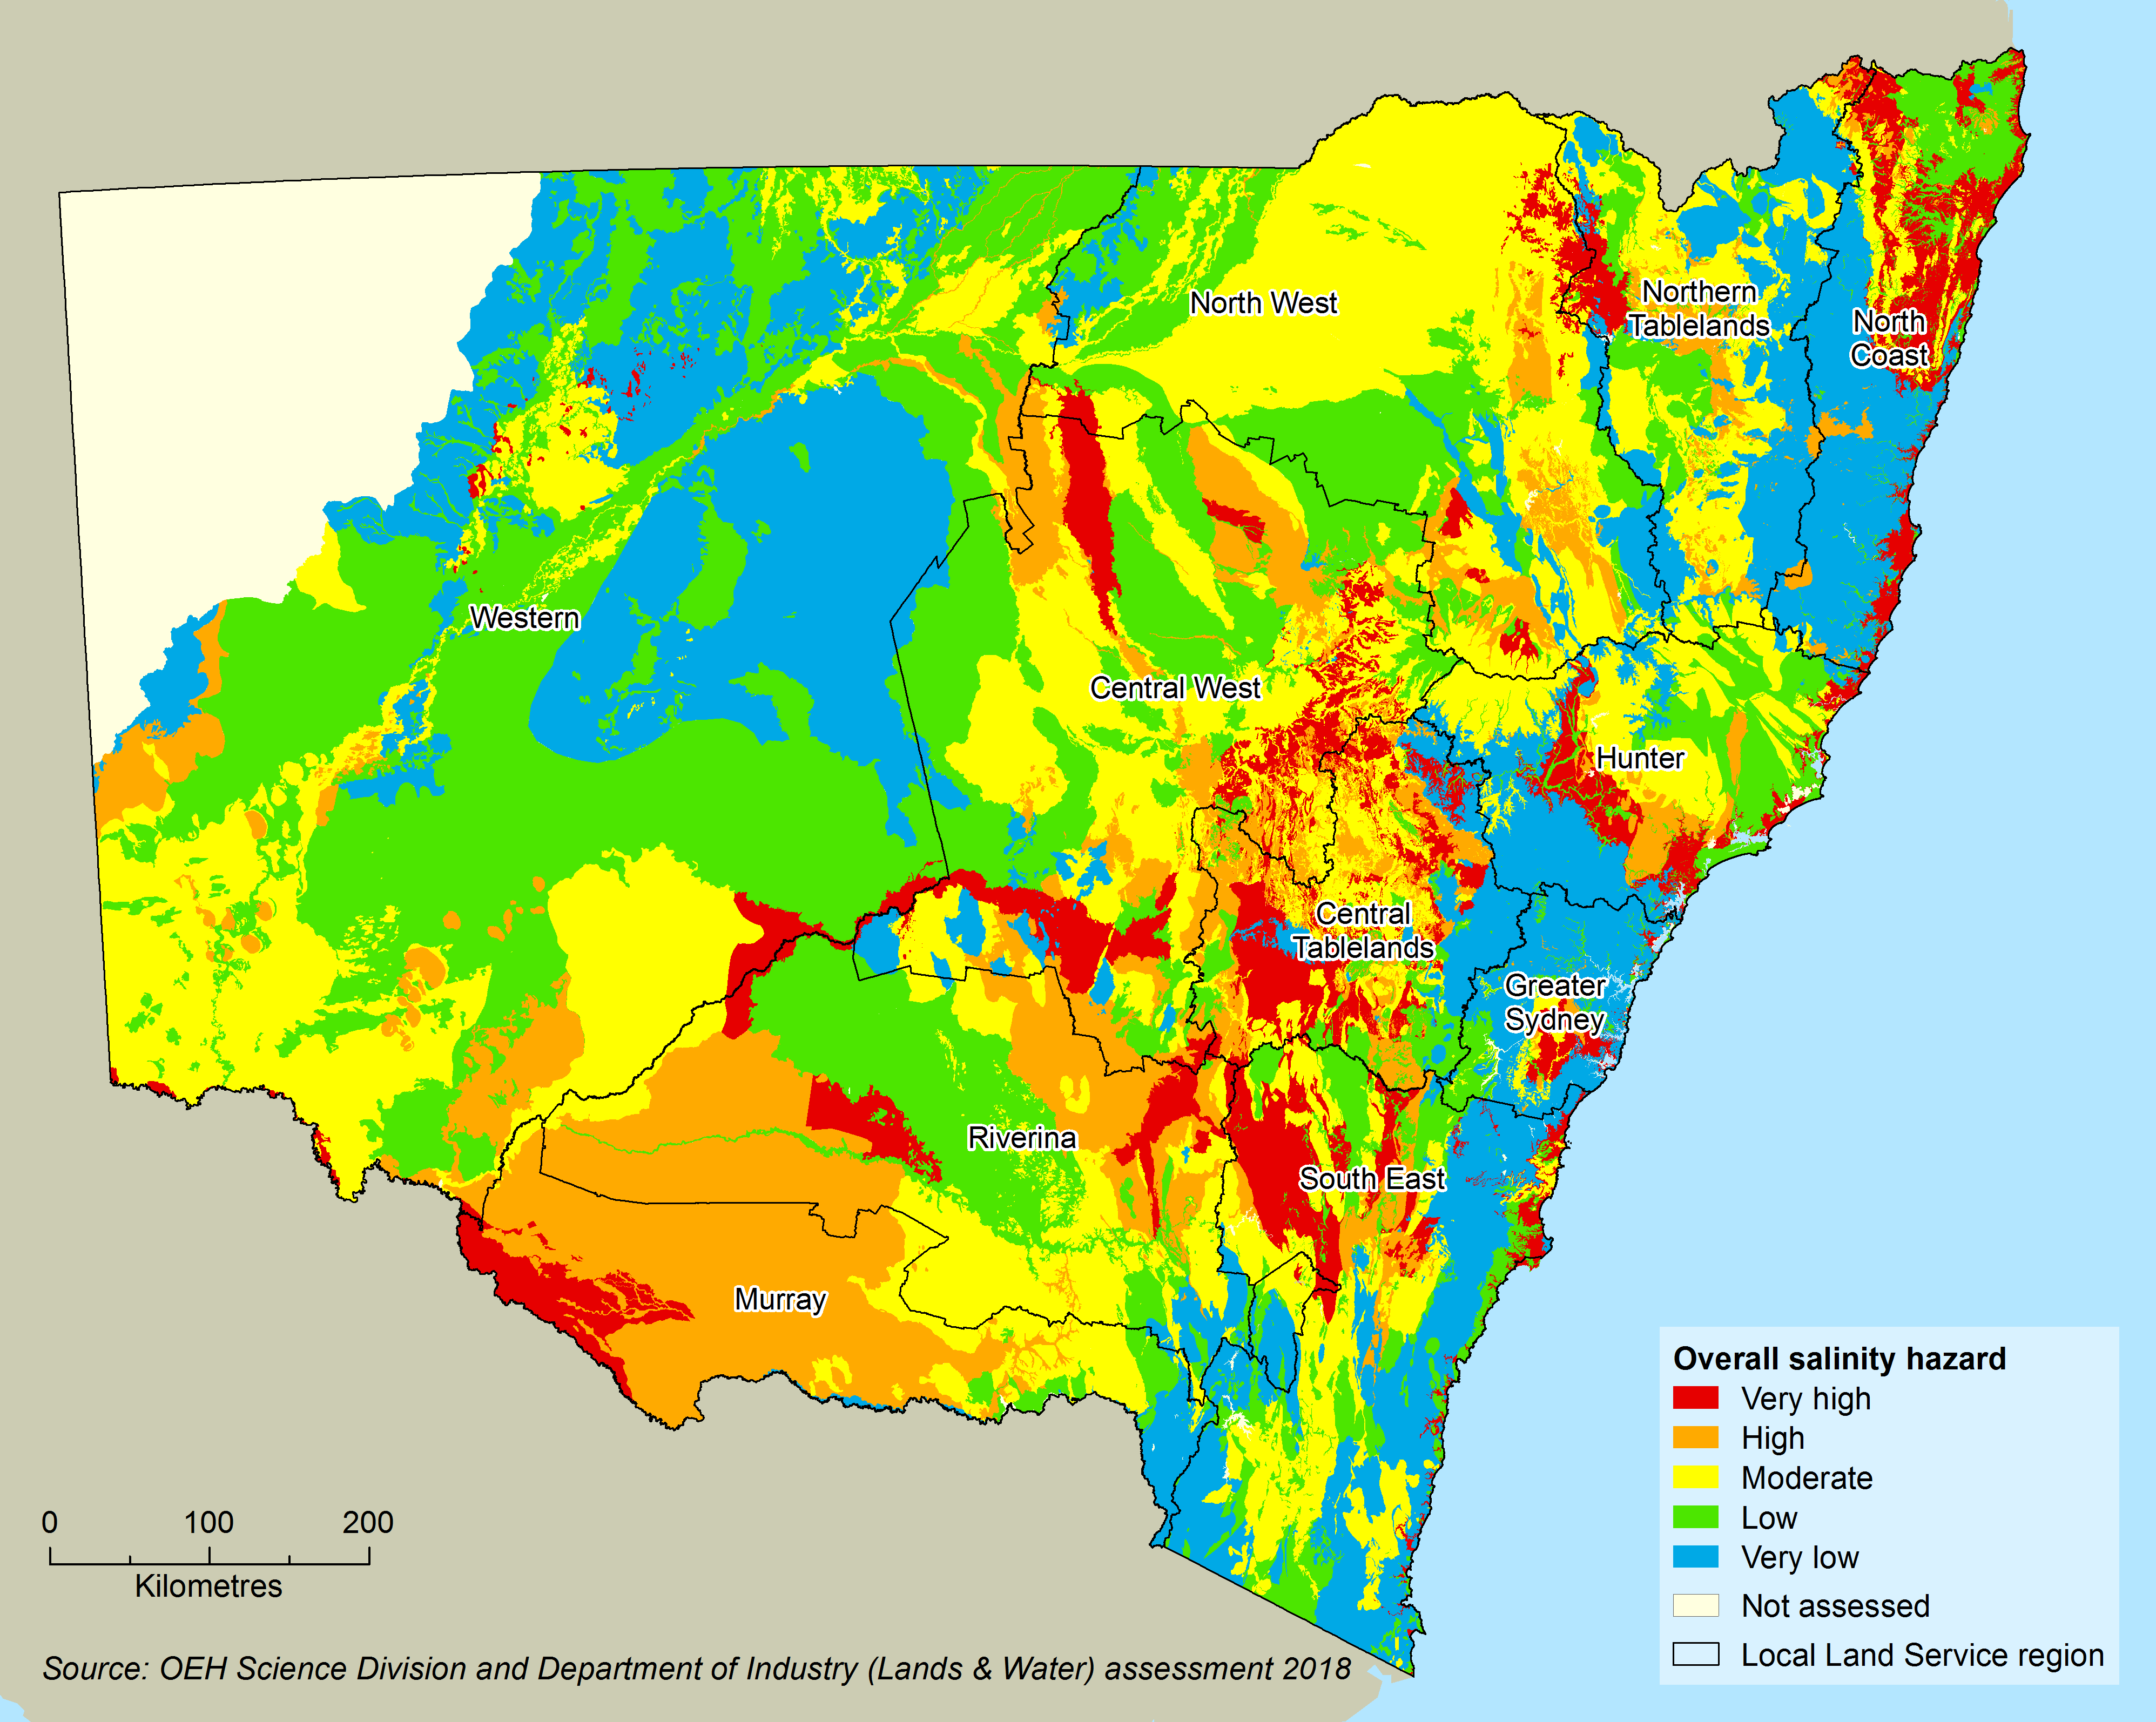 Map of salinity hazard across NSW (excluding the NW). Areas of high and low salinity are quite variable across NSW